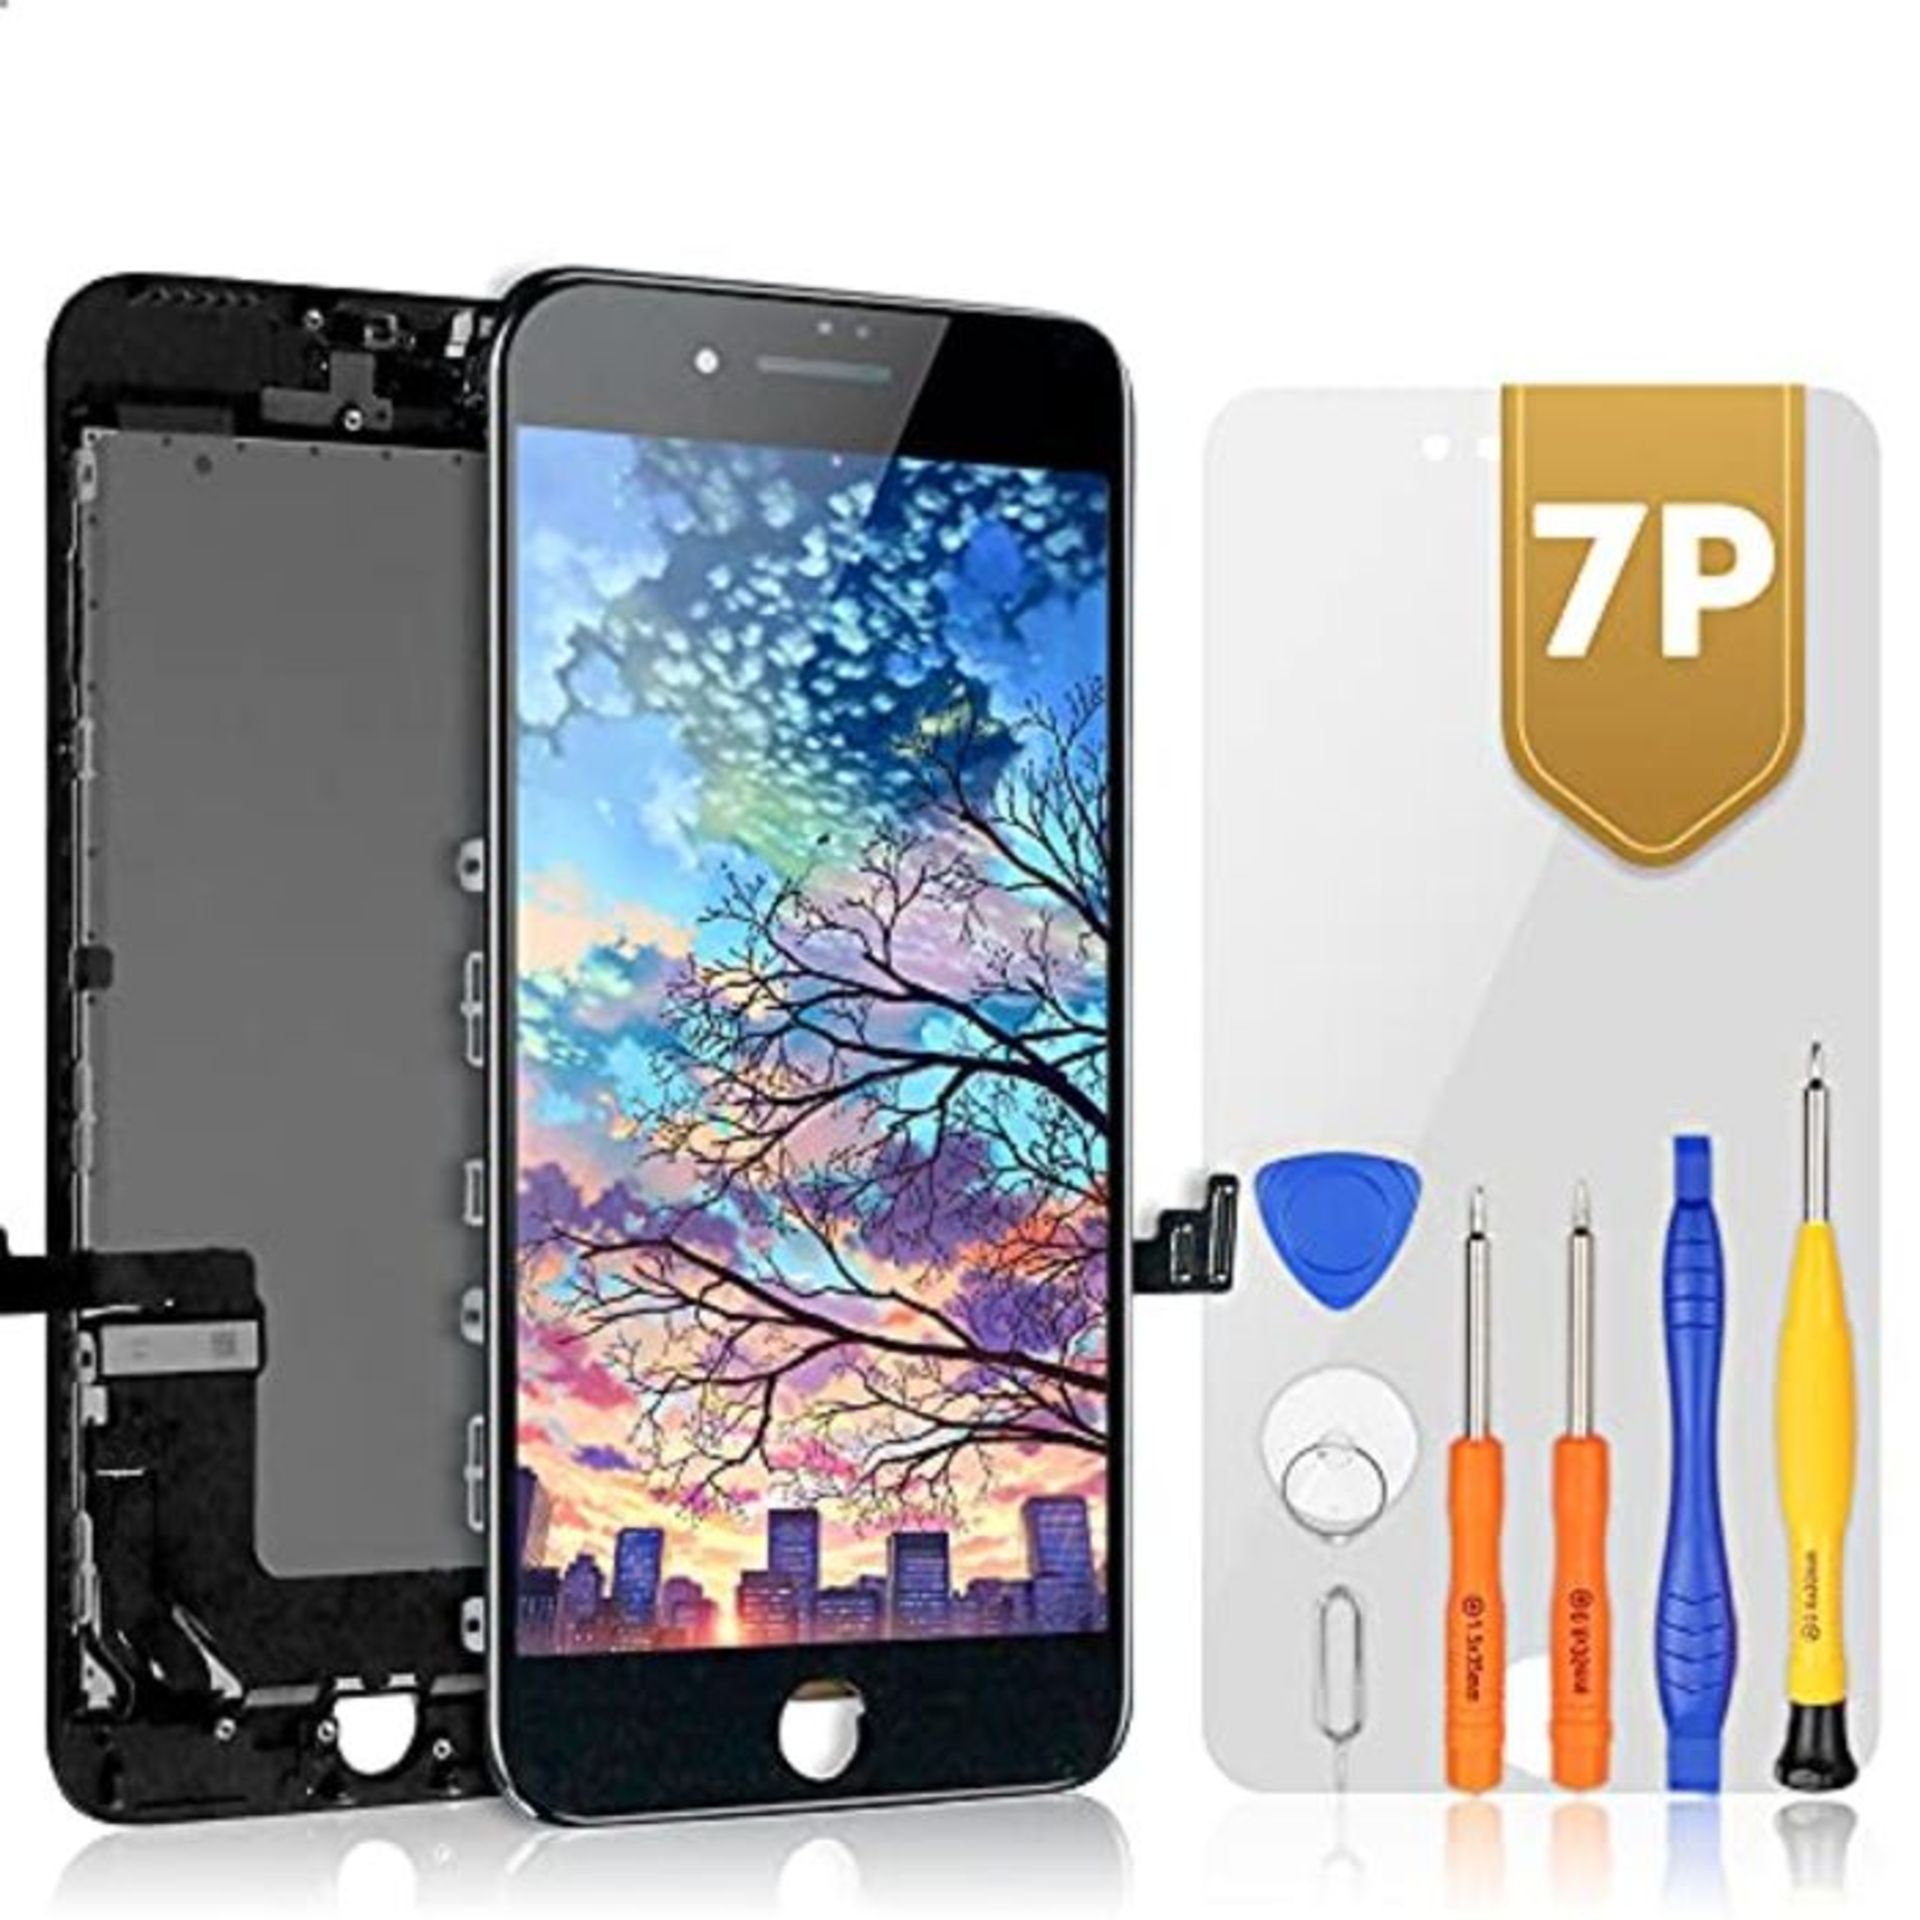 bokman for iPhone 7 Plus Black Screen Replacement Parts Display Assembly Front Panel